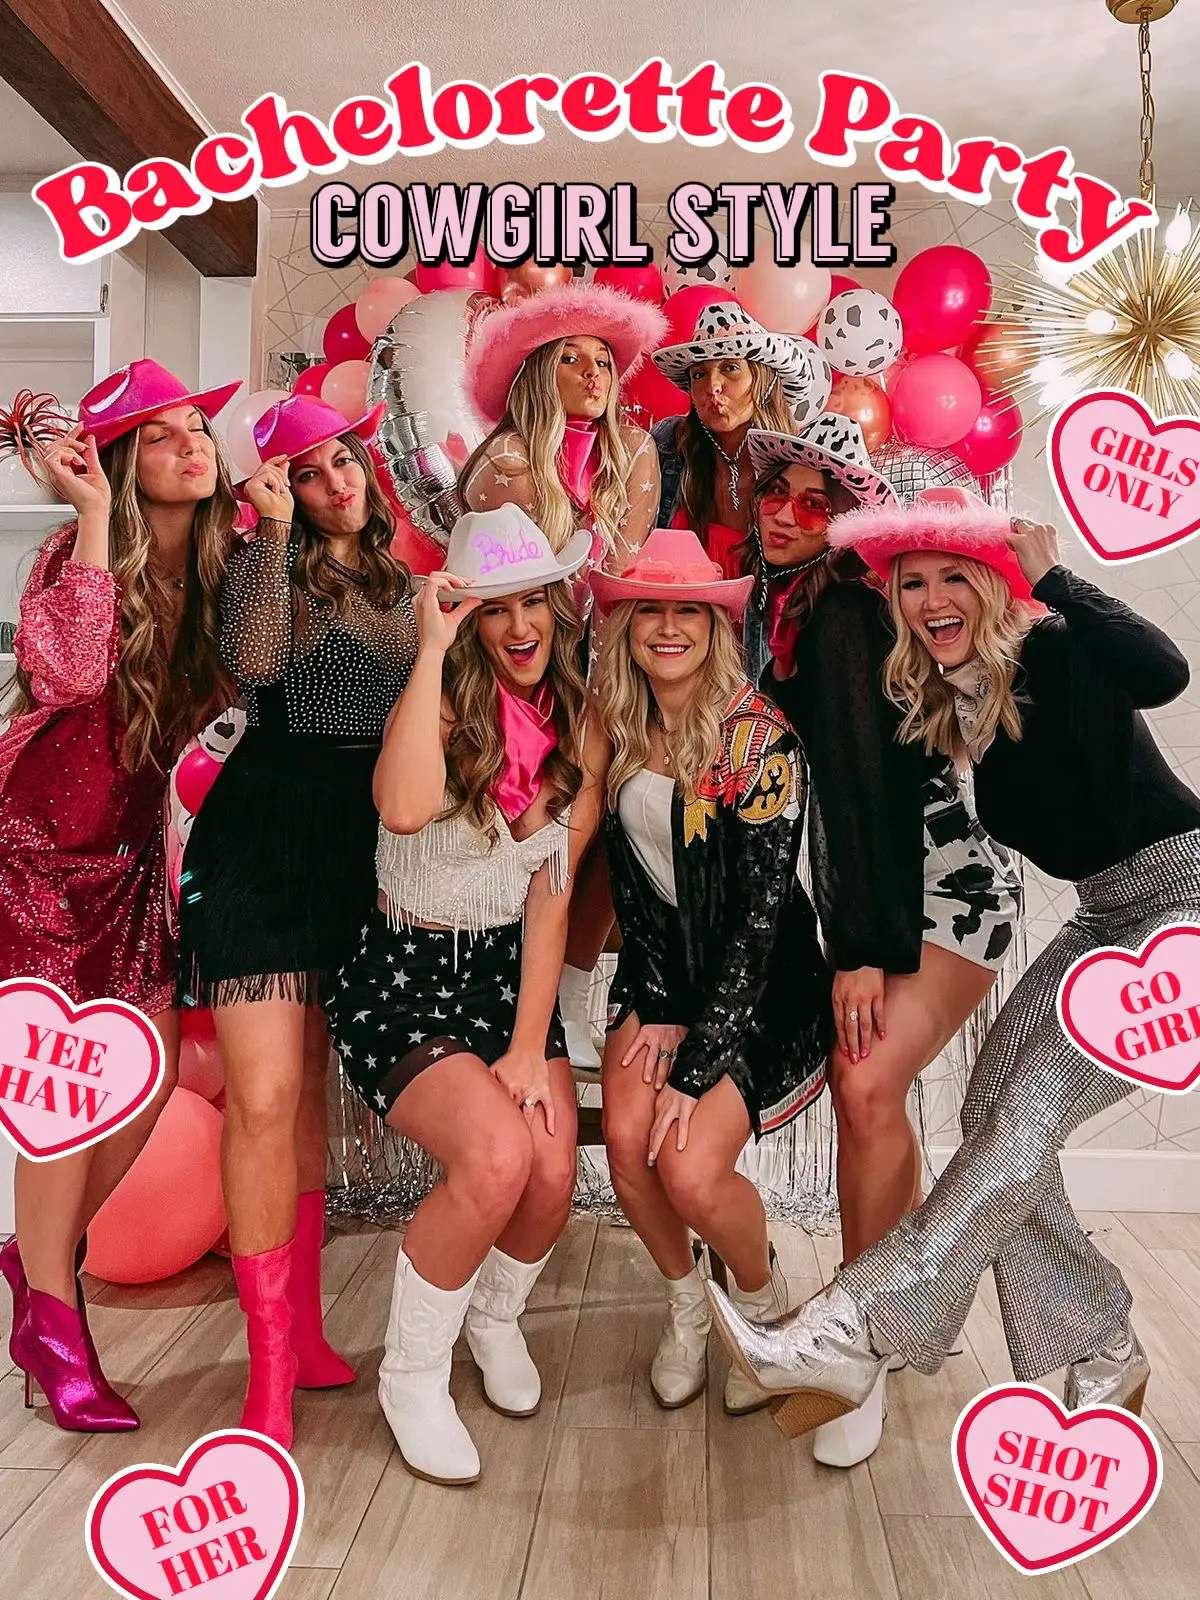 6 Bachelorette Party Surprises to Totally Wow the Bride